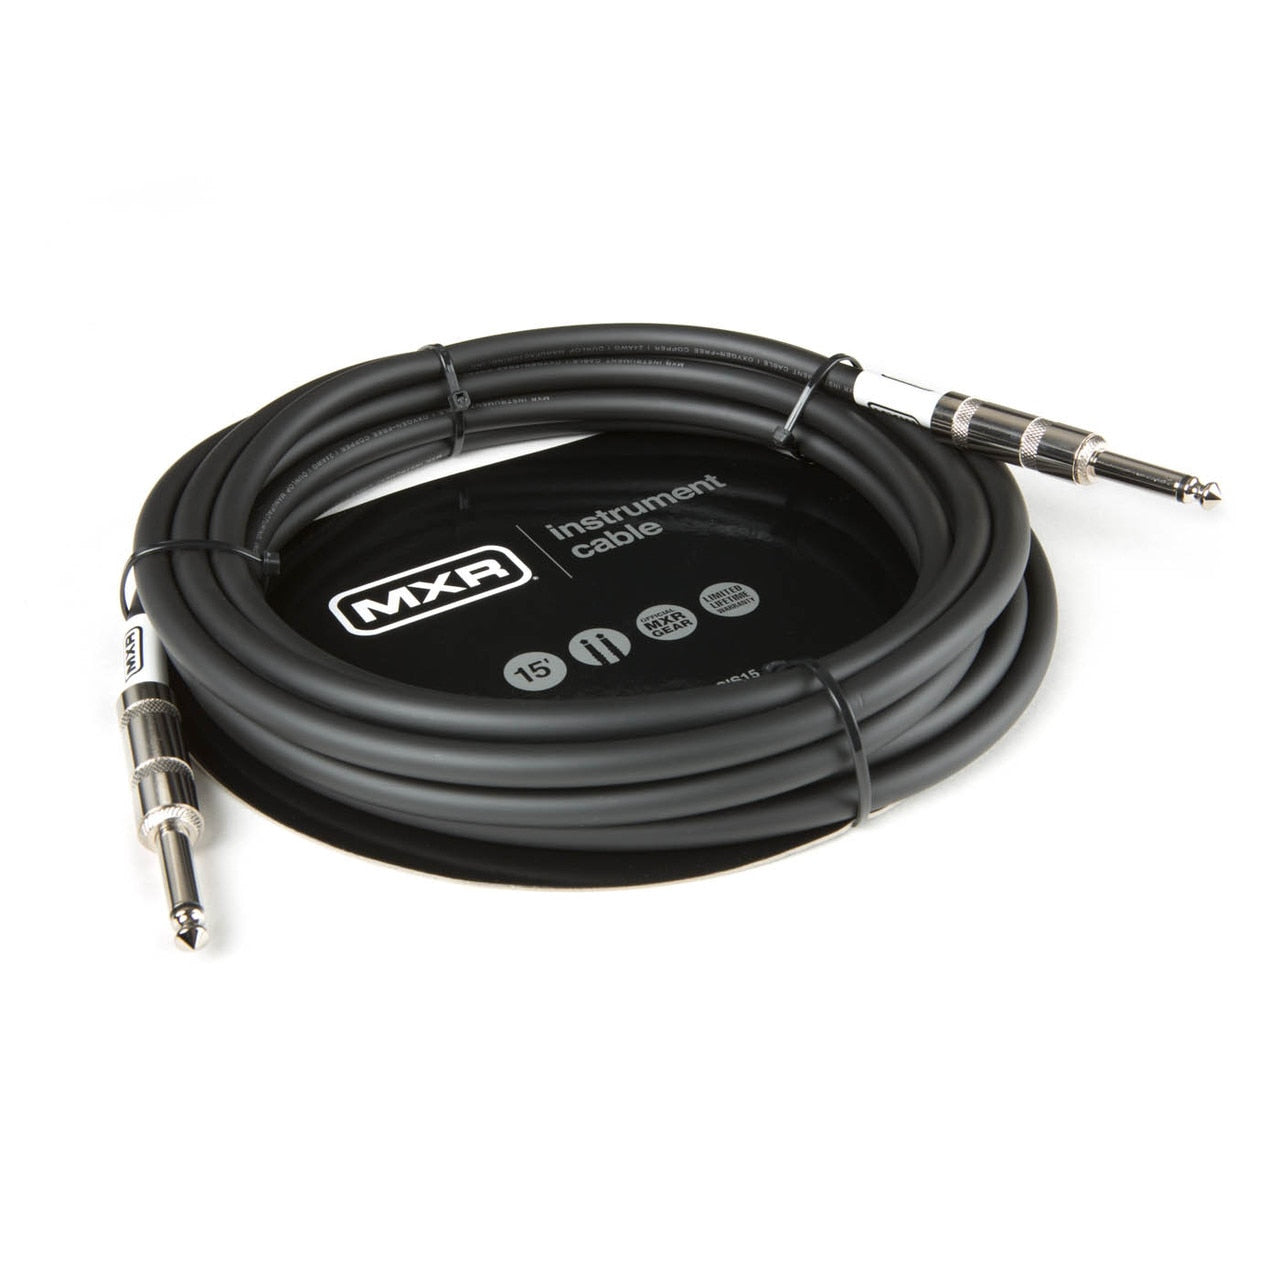 MXR® 15FT Standard Instrument Cable - Straight / Straight